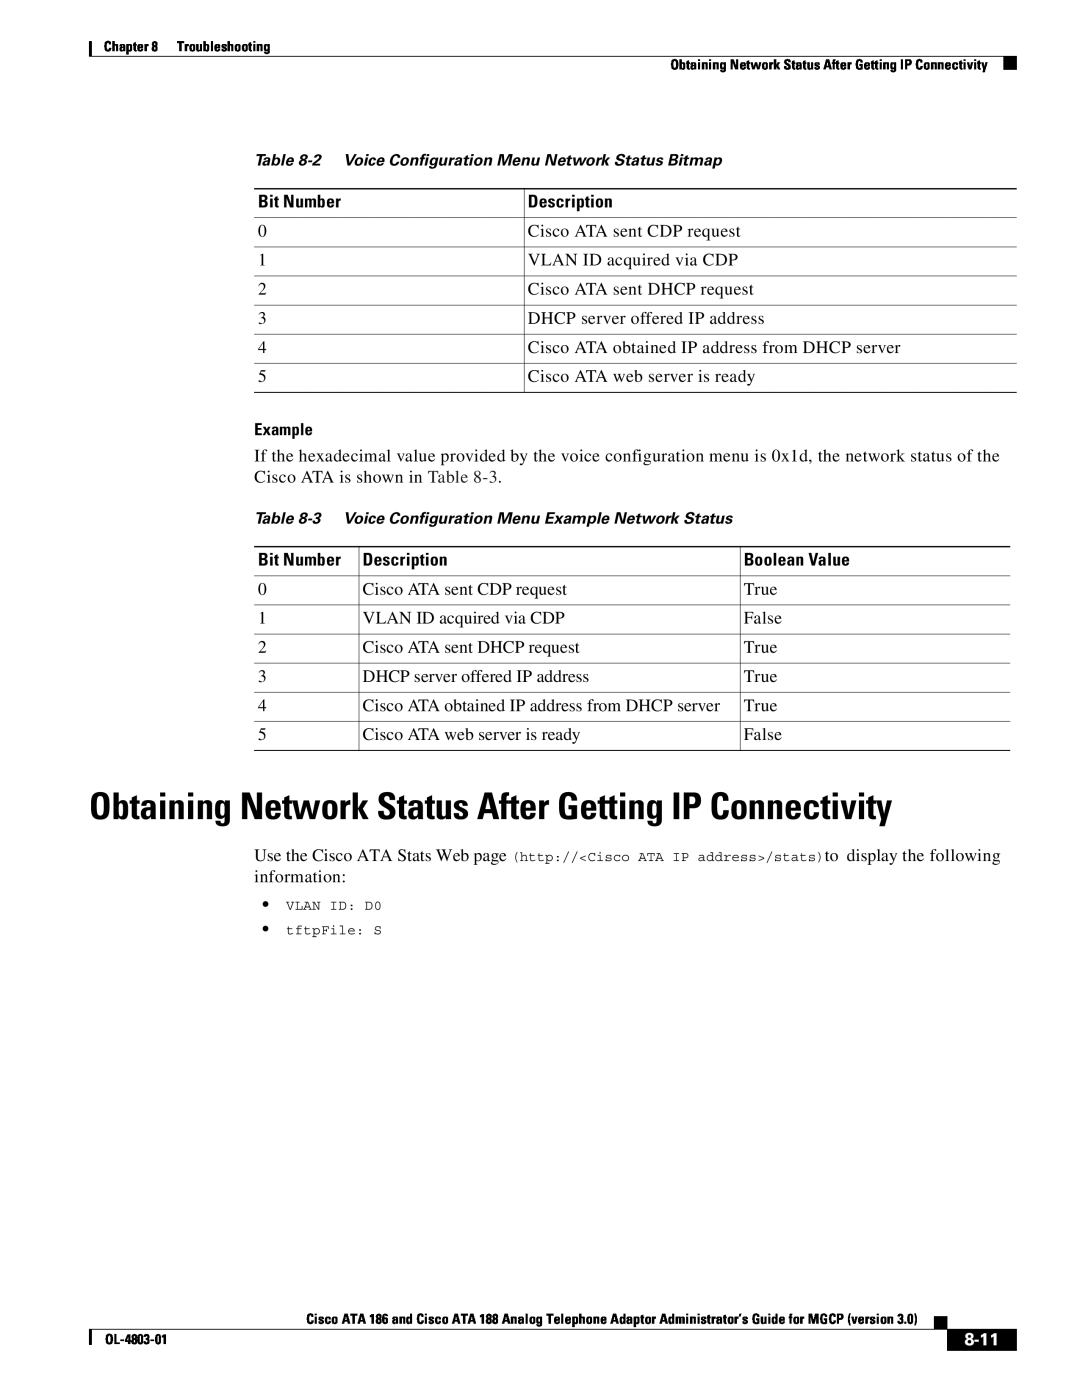 Cisco Systems ATA 188 Obtaining Network Status After Getting IP Connectivity, Boolean Value, 8-11, Bit Number, Description 